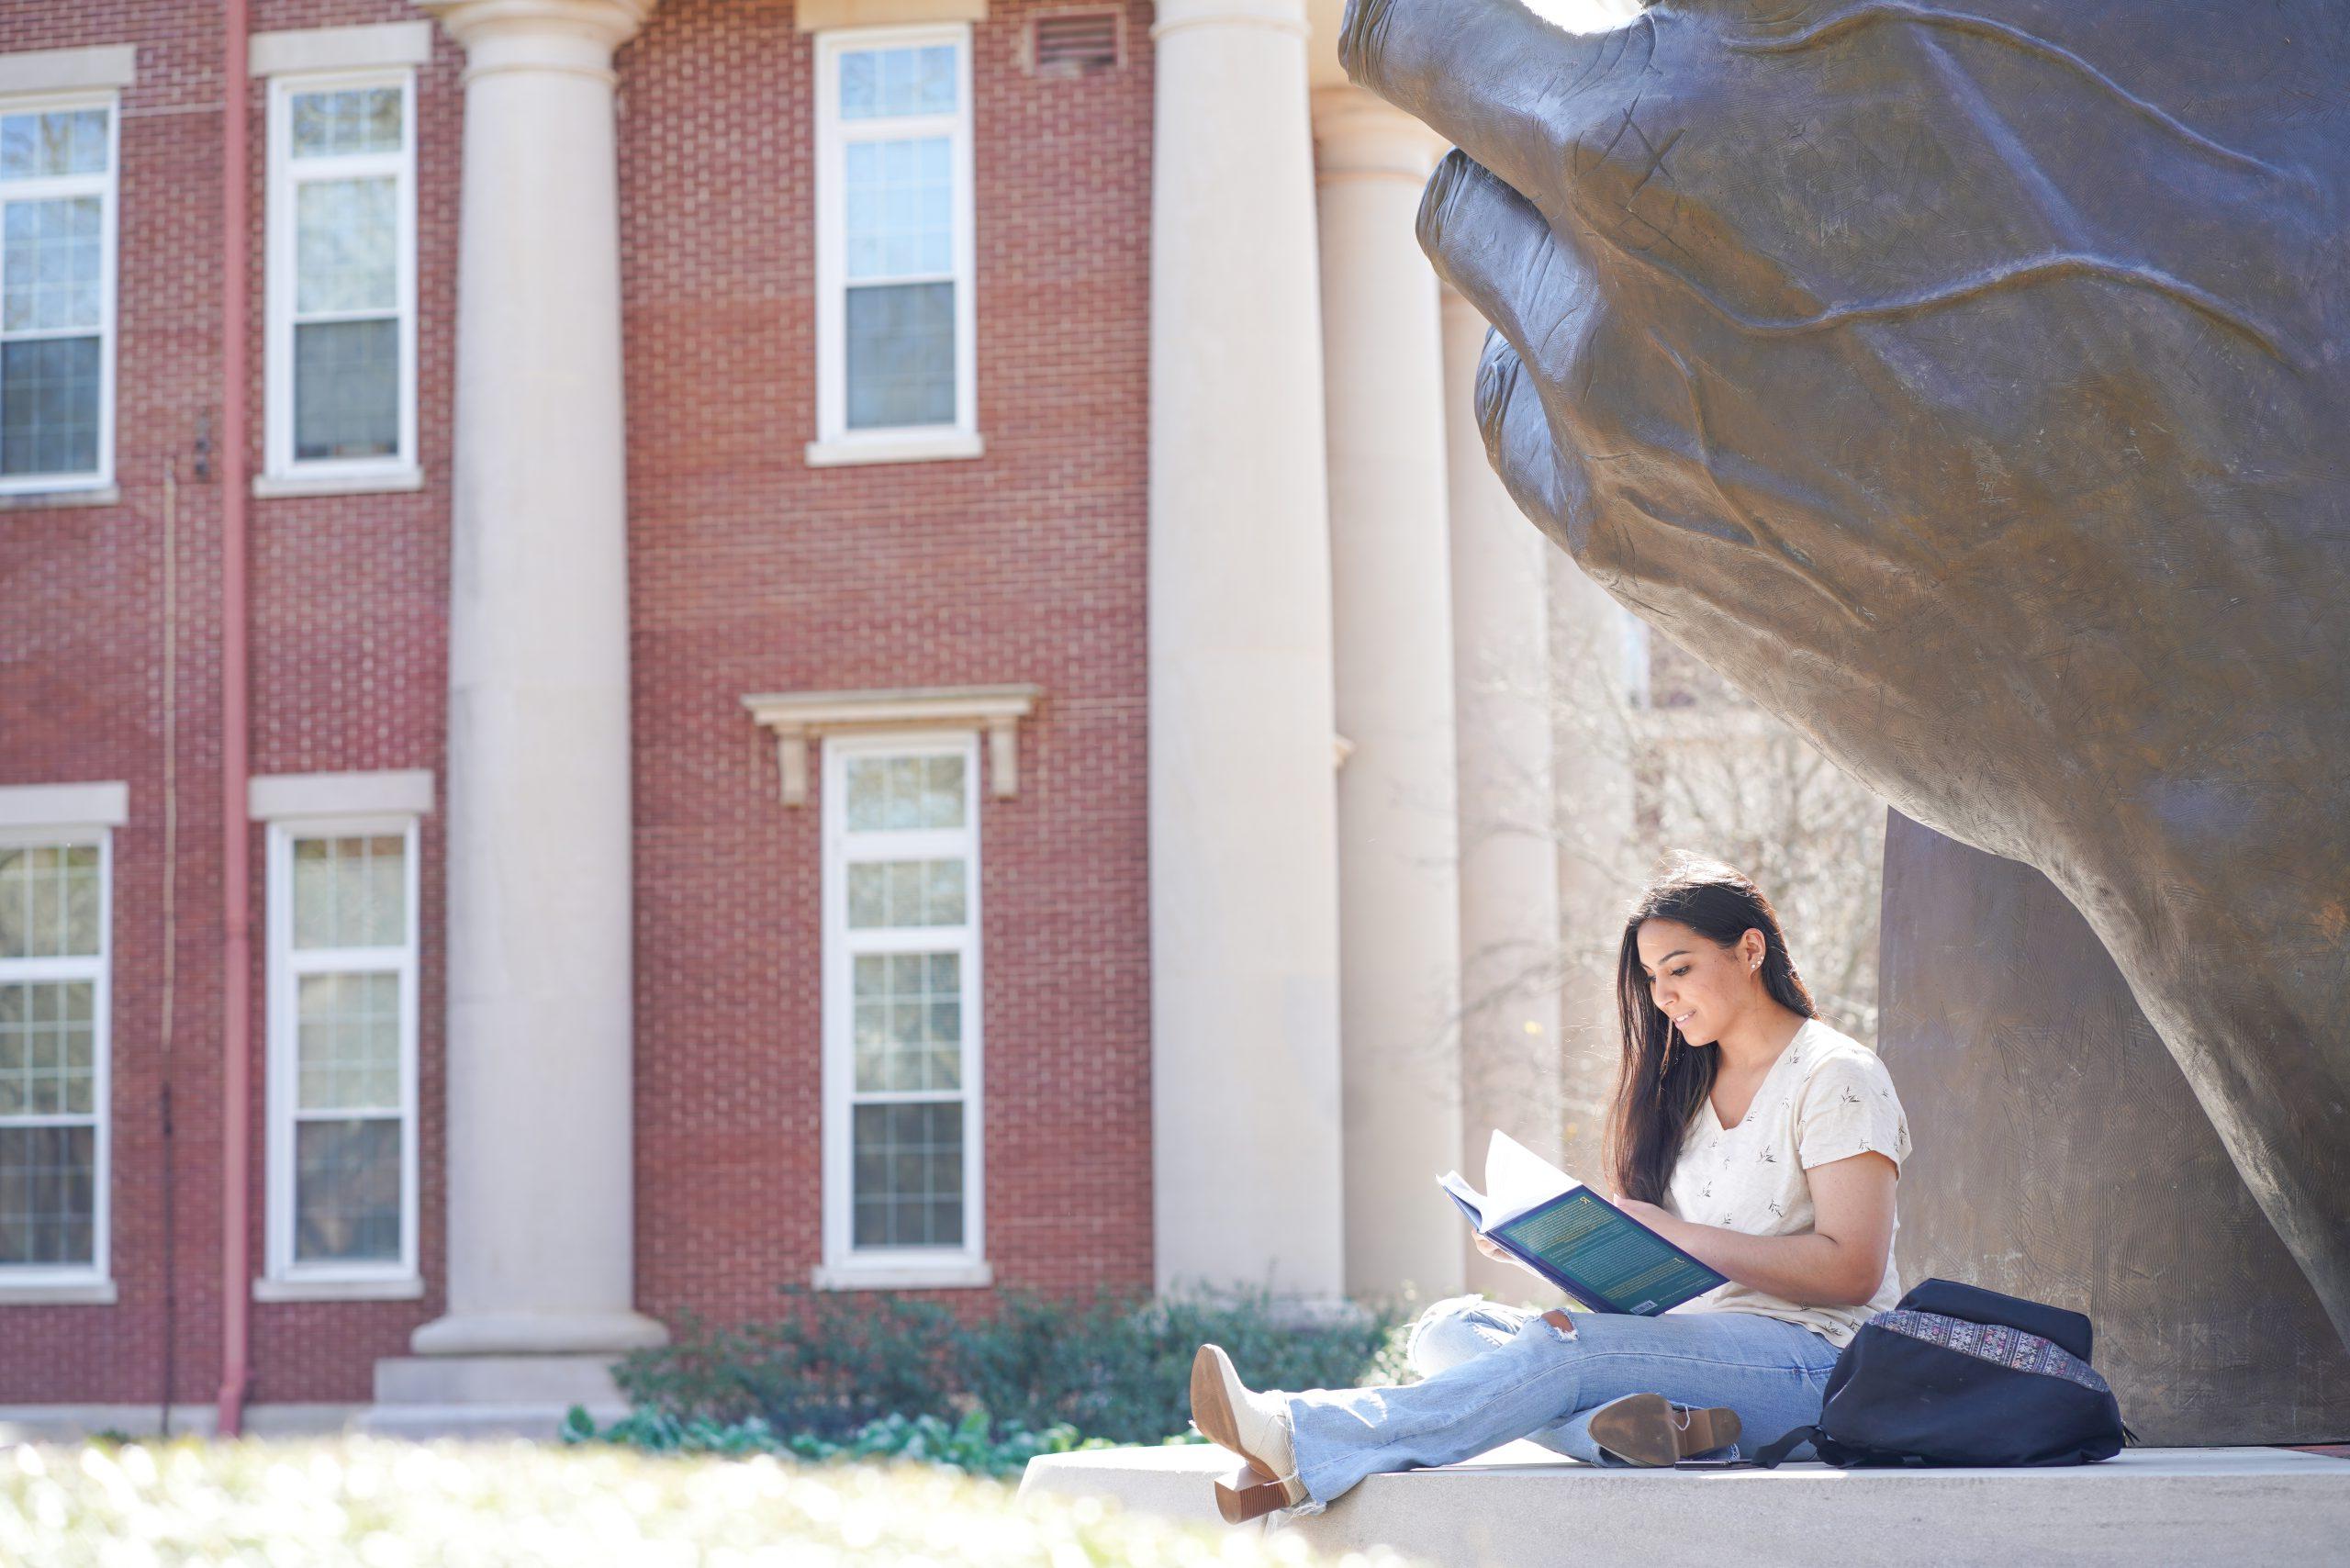 A University of Montevallo student studies underneath the Becoming statue.